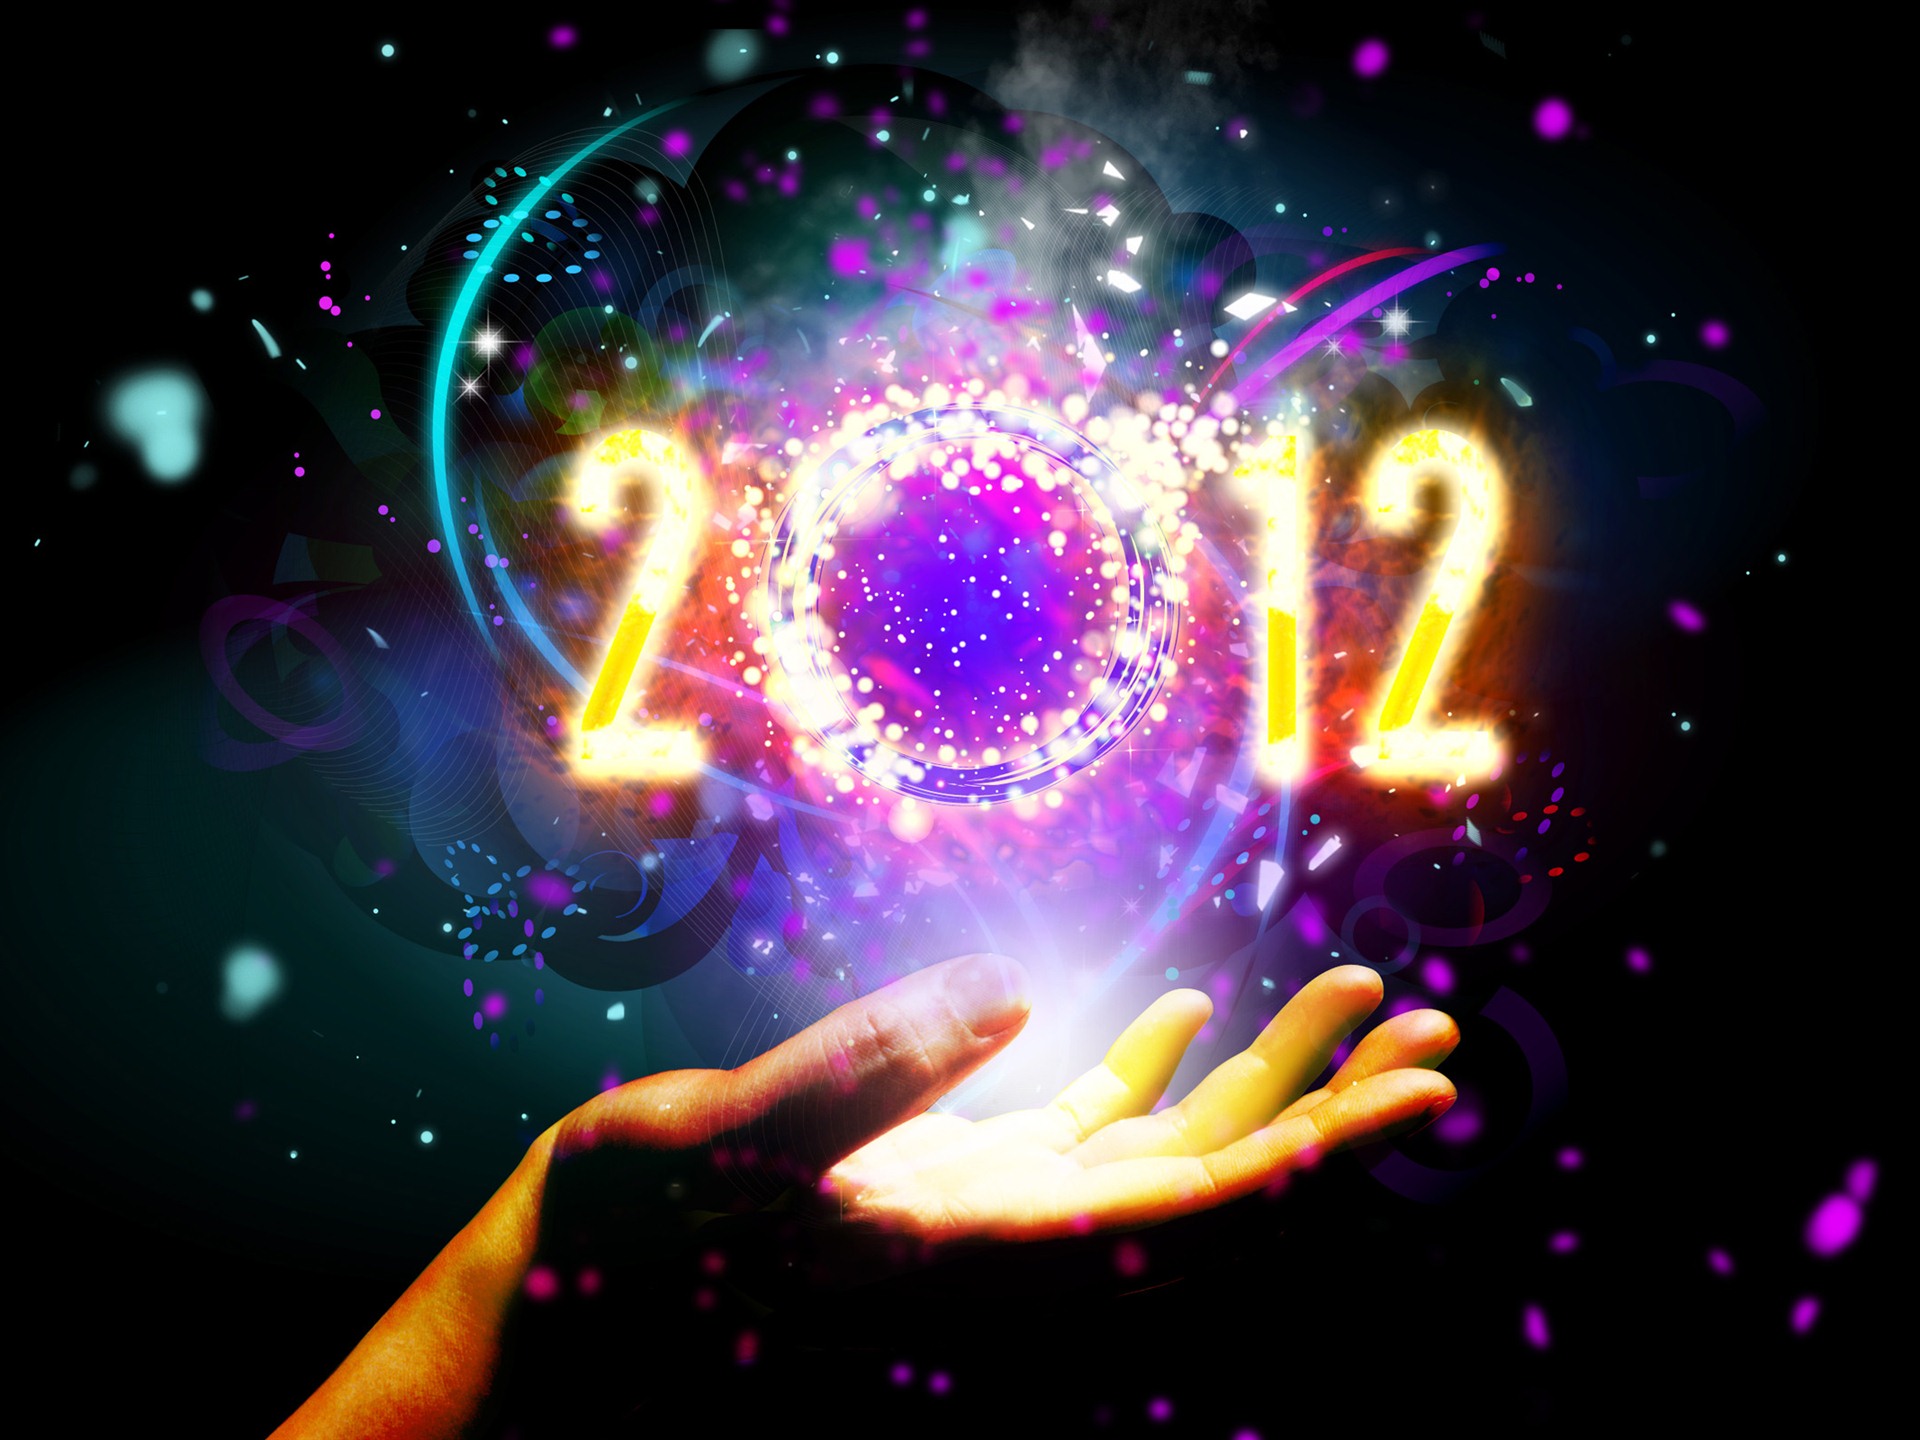 2012 New Year wallpapers (2) #12 - 1920x1440